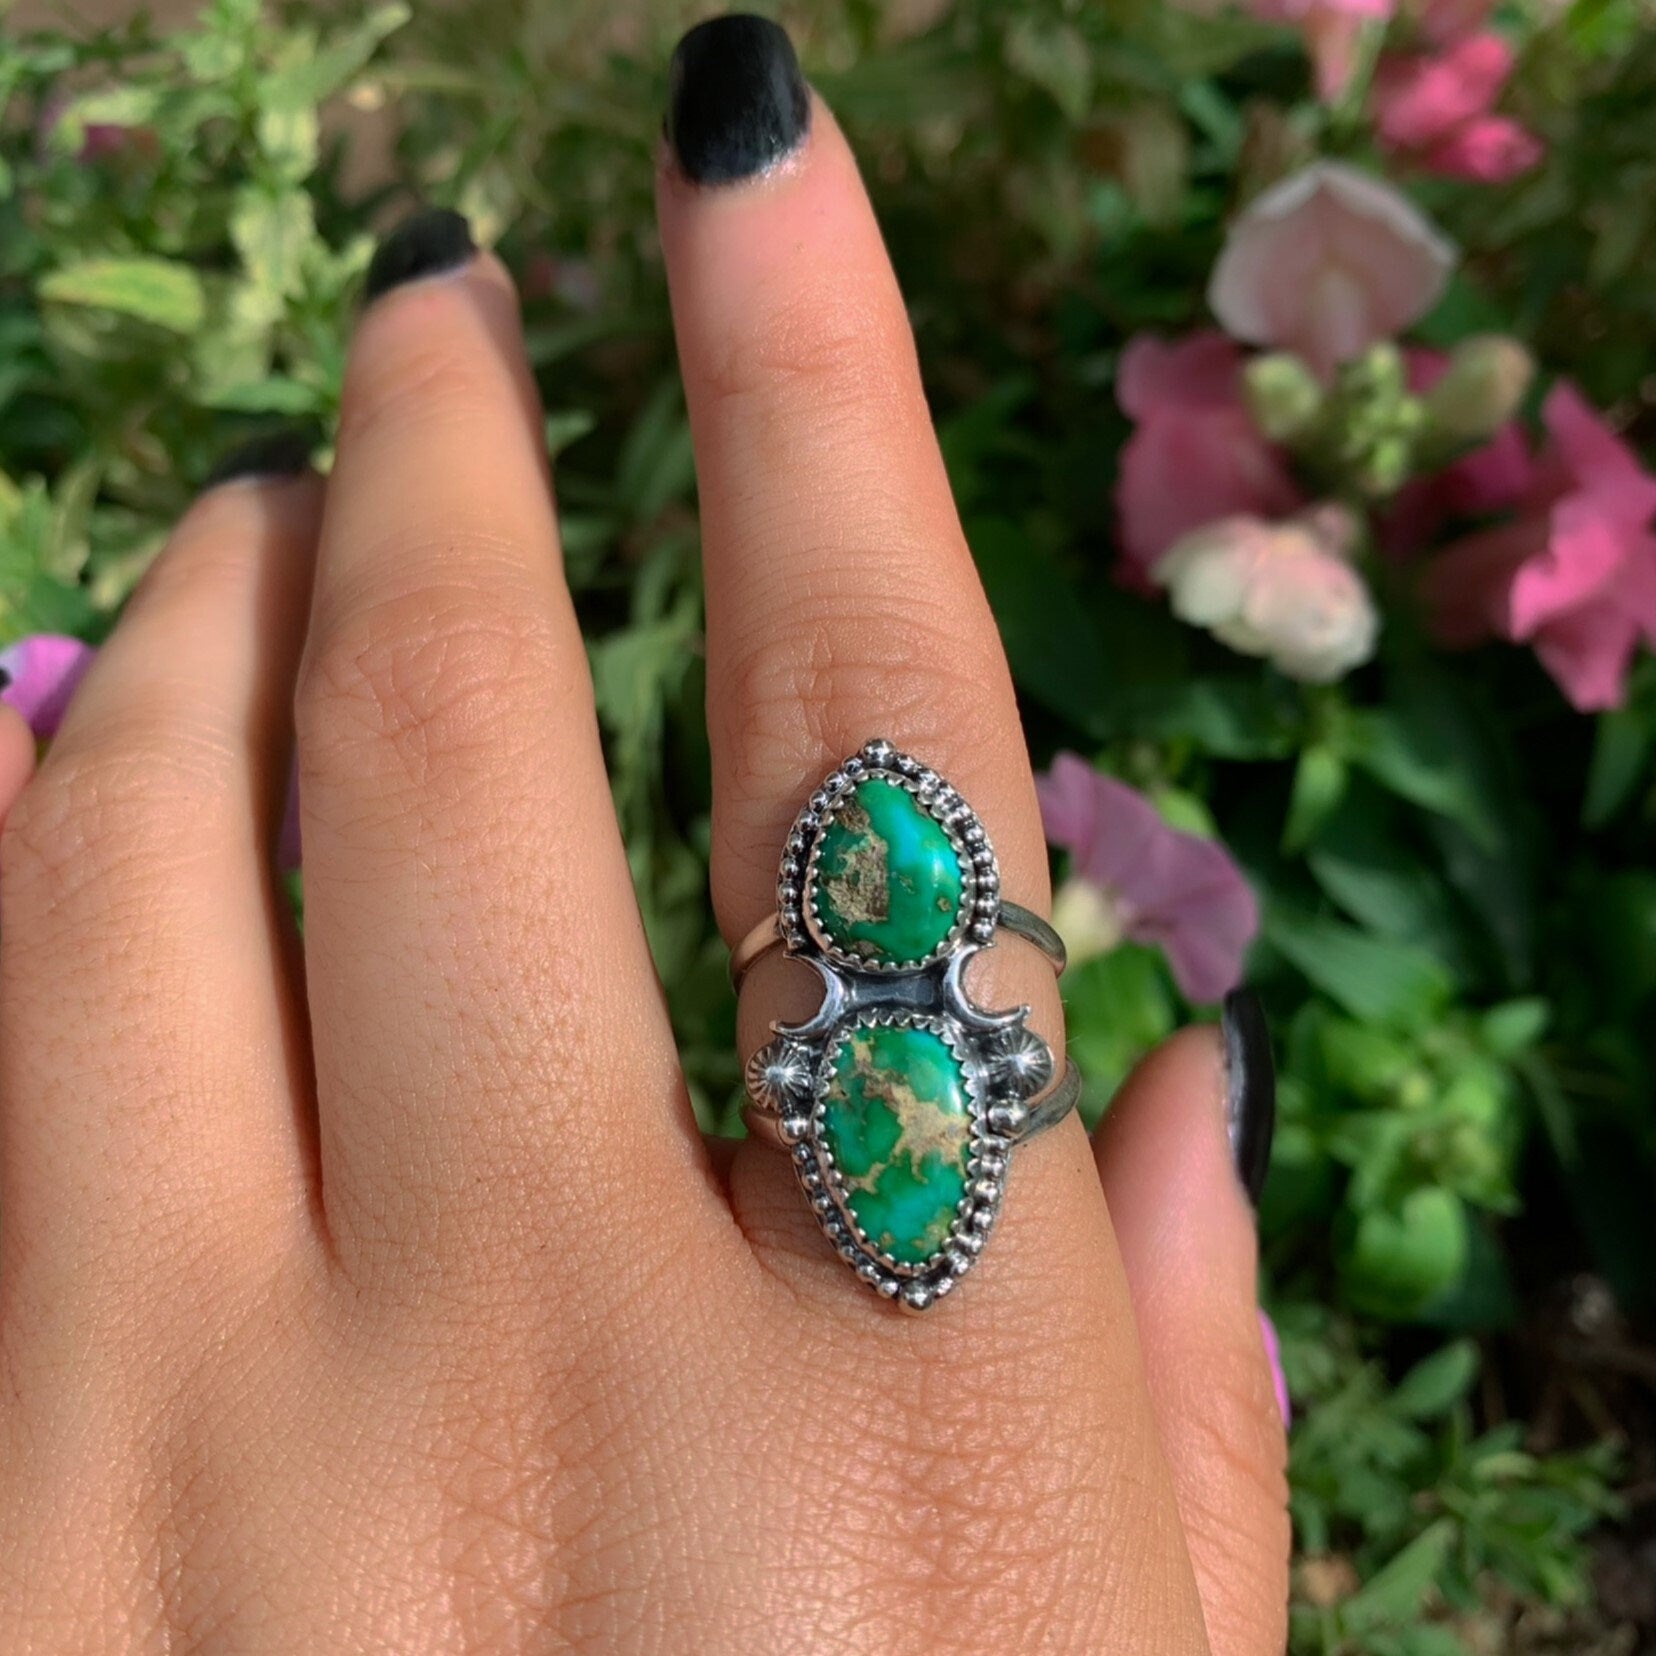 Sonoran Gold Turquoise Ring - Size 7 1/2 - Sterling Silver - Green Turquoise Jewellery - Aqua Turquoise Jewelry - Double Turquoise Ring